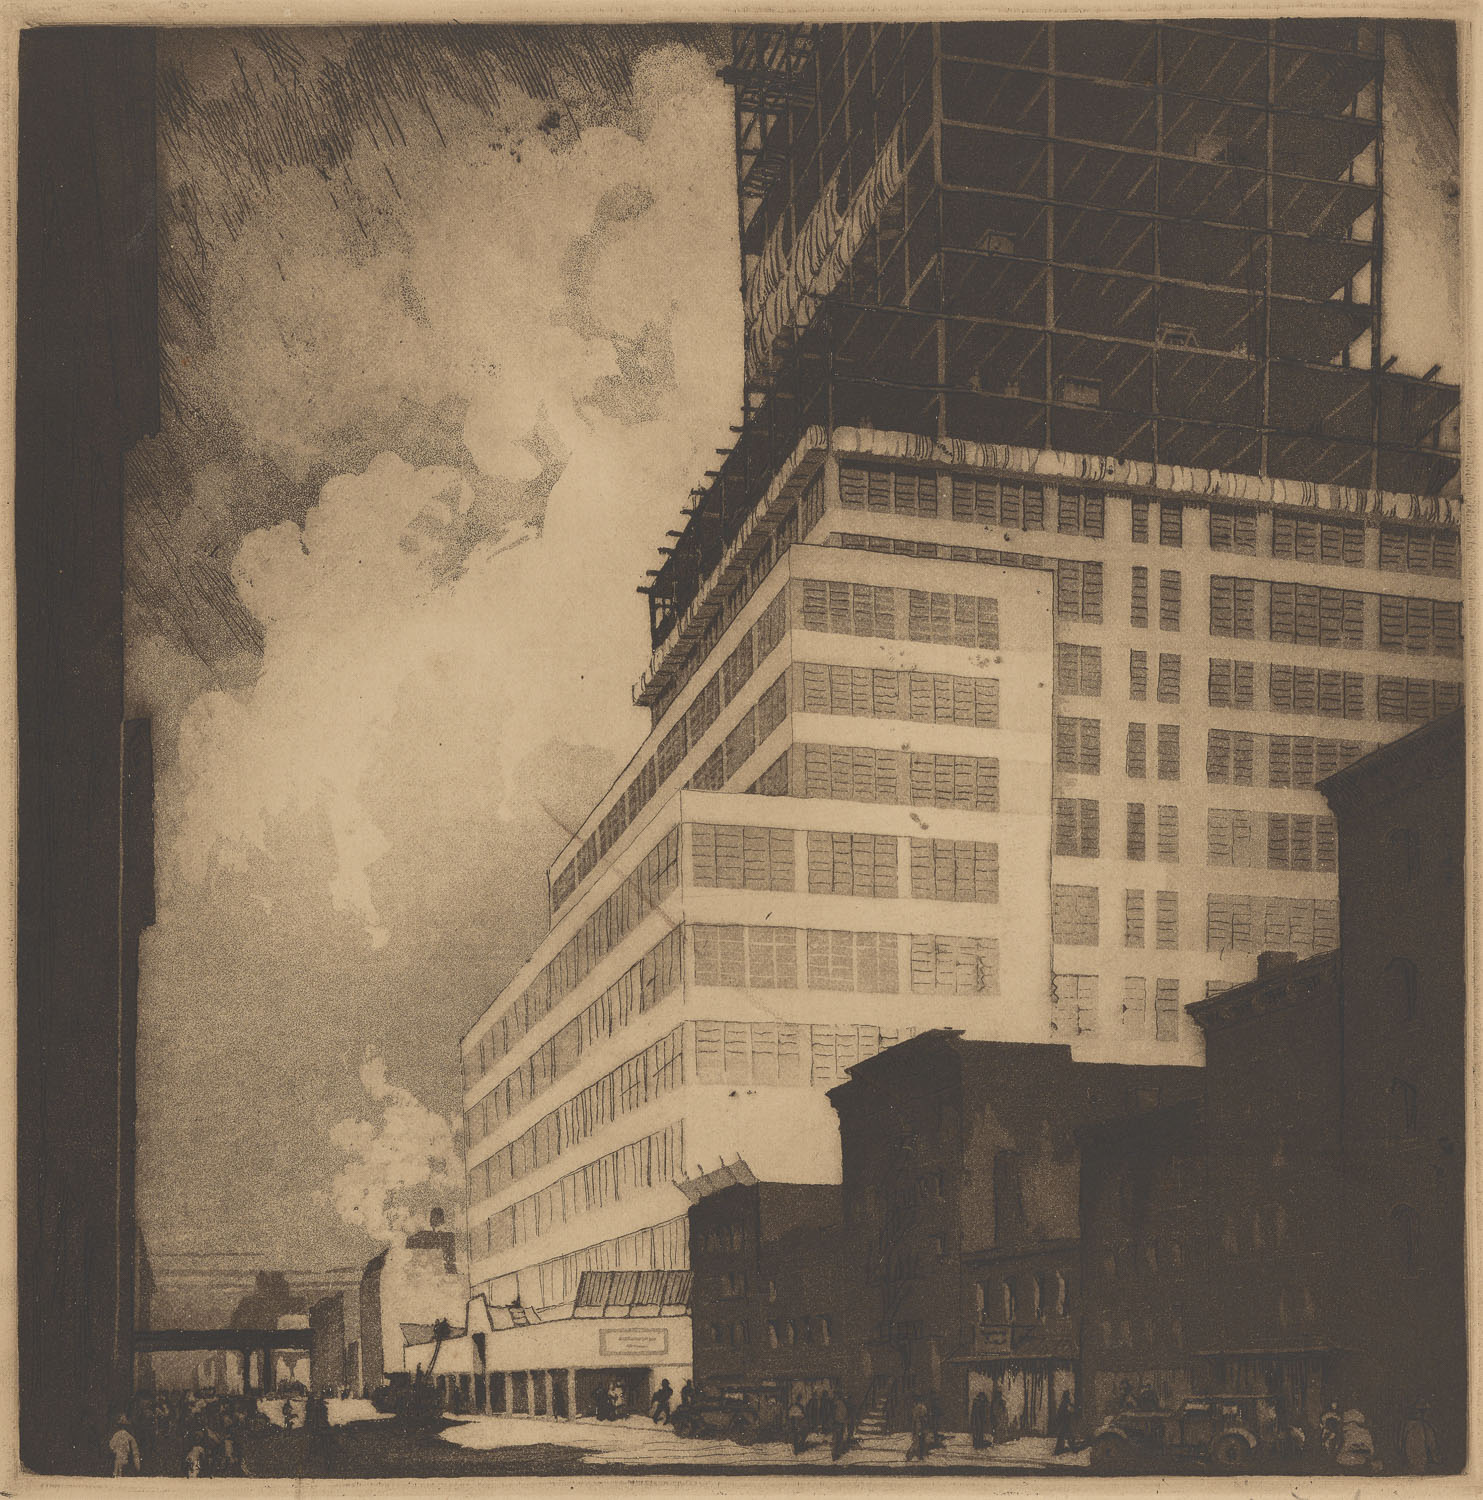 A black print on yellowed paper of the lower half of the building under construction viewed from the street. The lower stories of the skyscraper, with windows and terra cotta cladding, are light and stand in contrast to the dark, two and three story buildings in the foreground. The upper stories visible do not have windows or cladding and al that is visible is the steel frame of the skyscraper. Construction tarps and canvasses billow in the breeze surrounded by a cloudy, smoky sky.